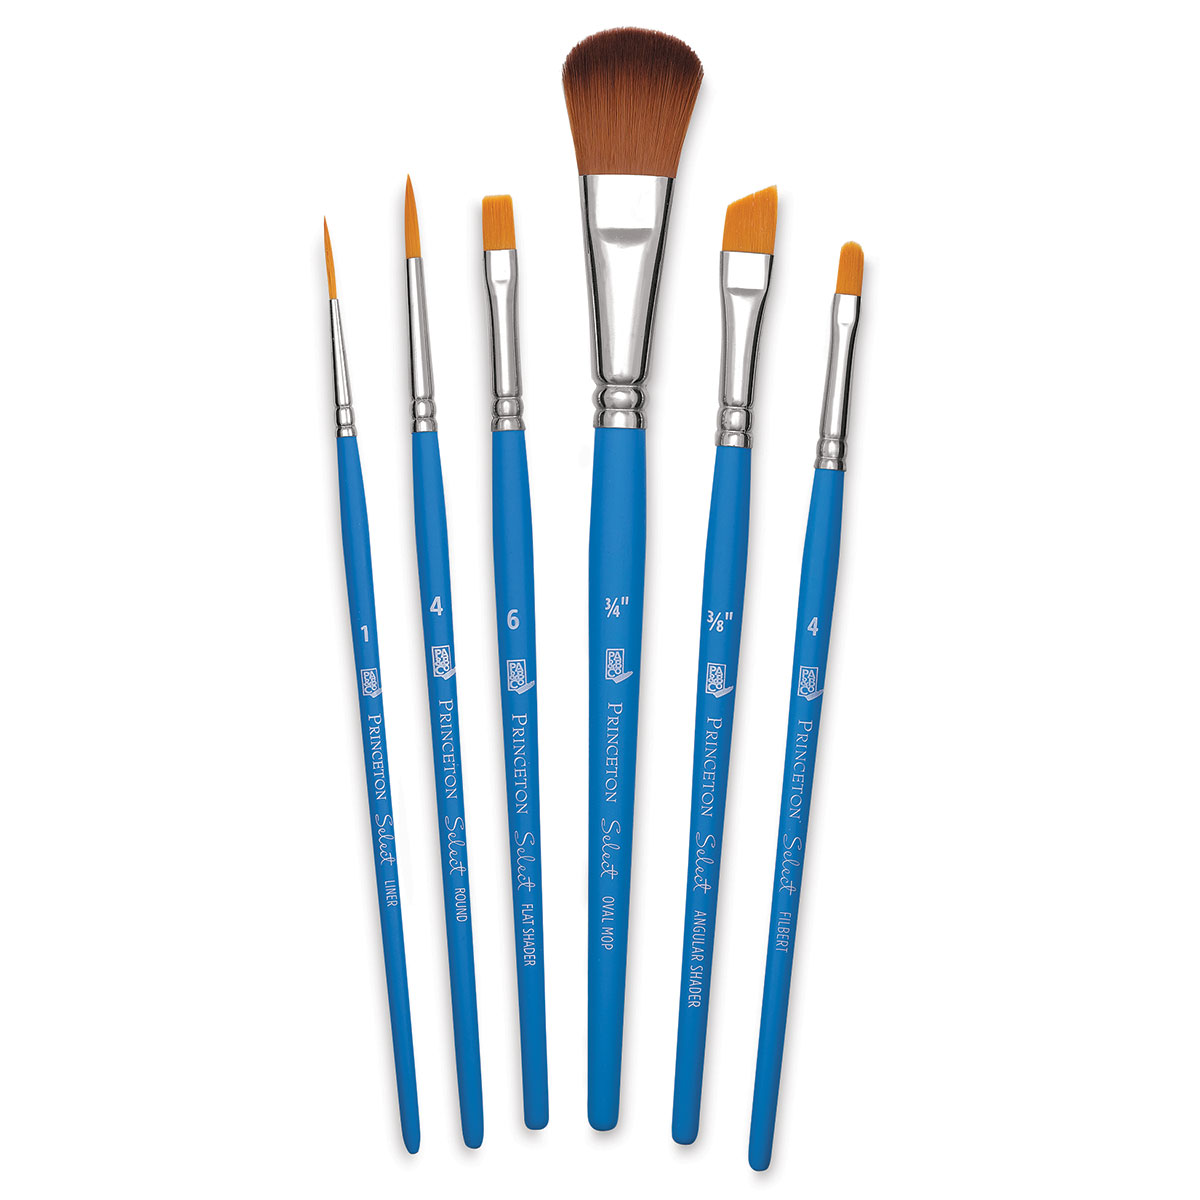 Select Filbert 12 by Princeton Brush - Brushes and More